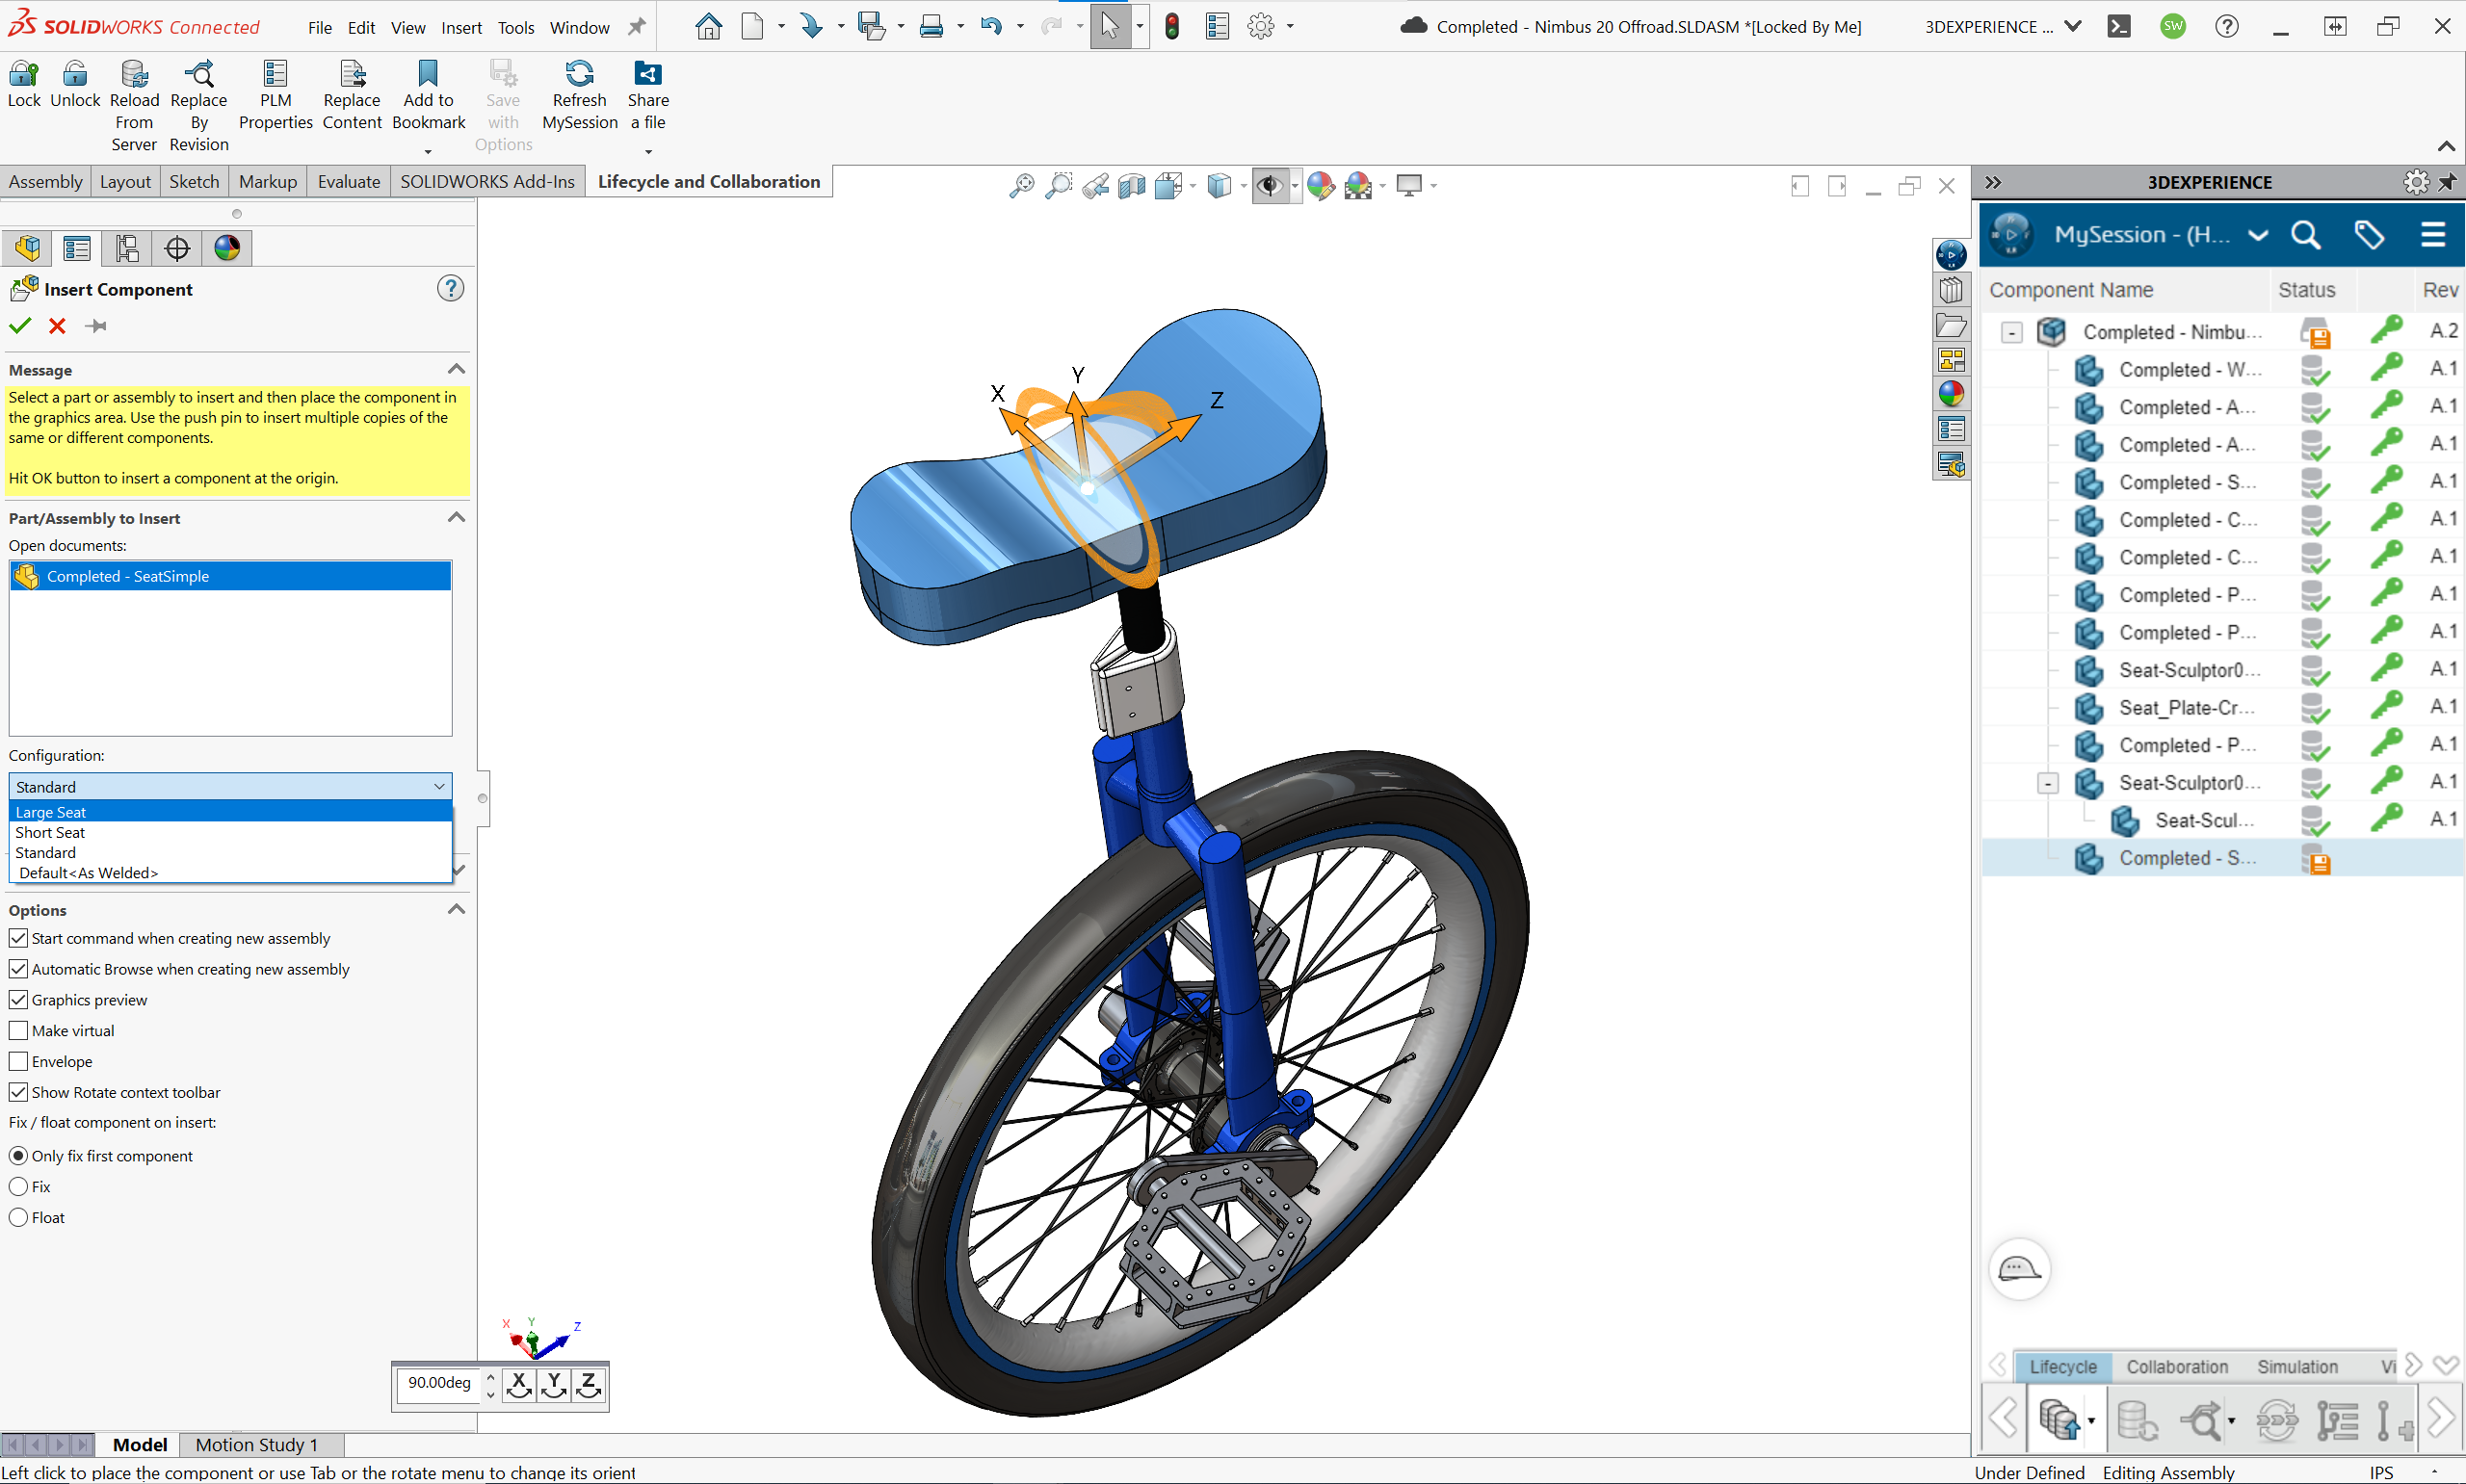 Specify configuration when using insert part command in SOLIDWORKS 